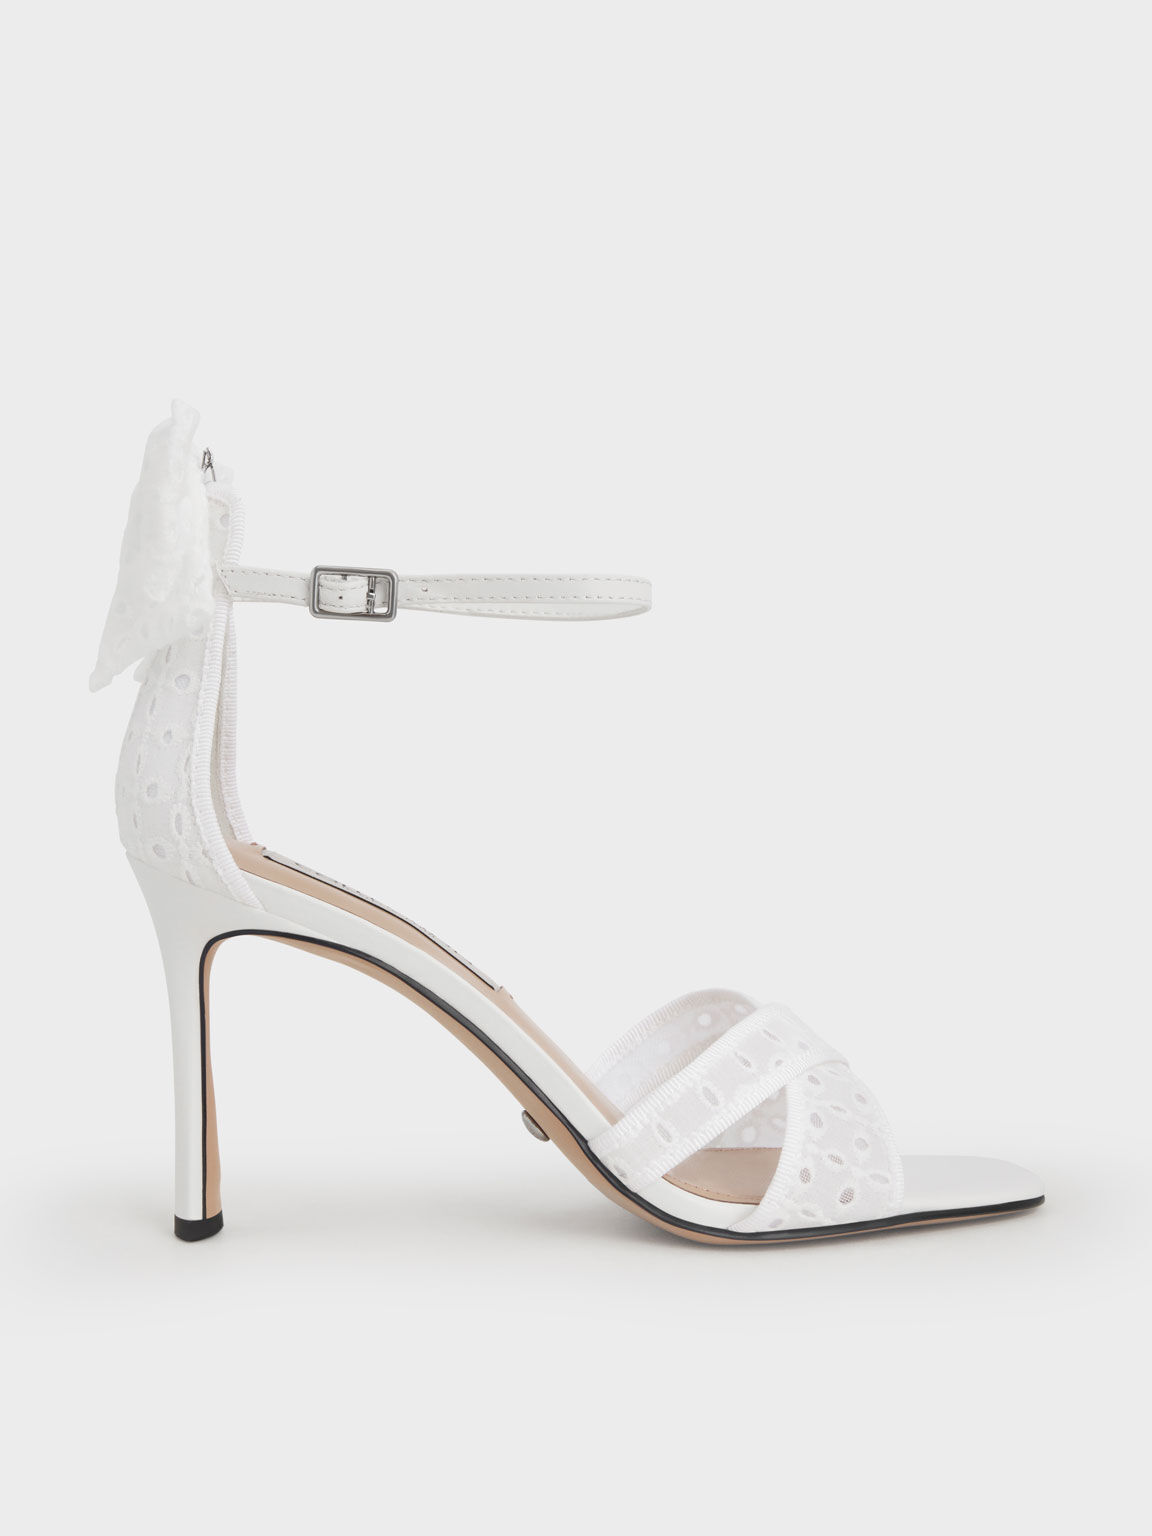 The Bridal Collection: Blythe Broderie Anglaise Leather Sandals, White, hi-res